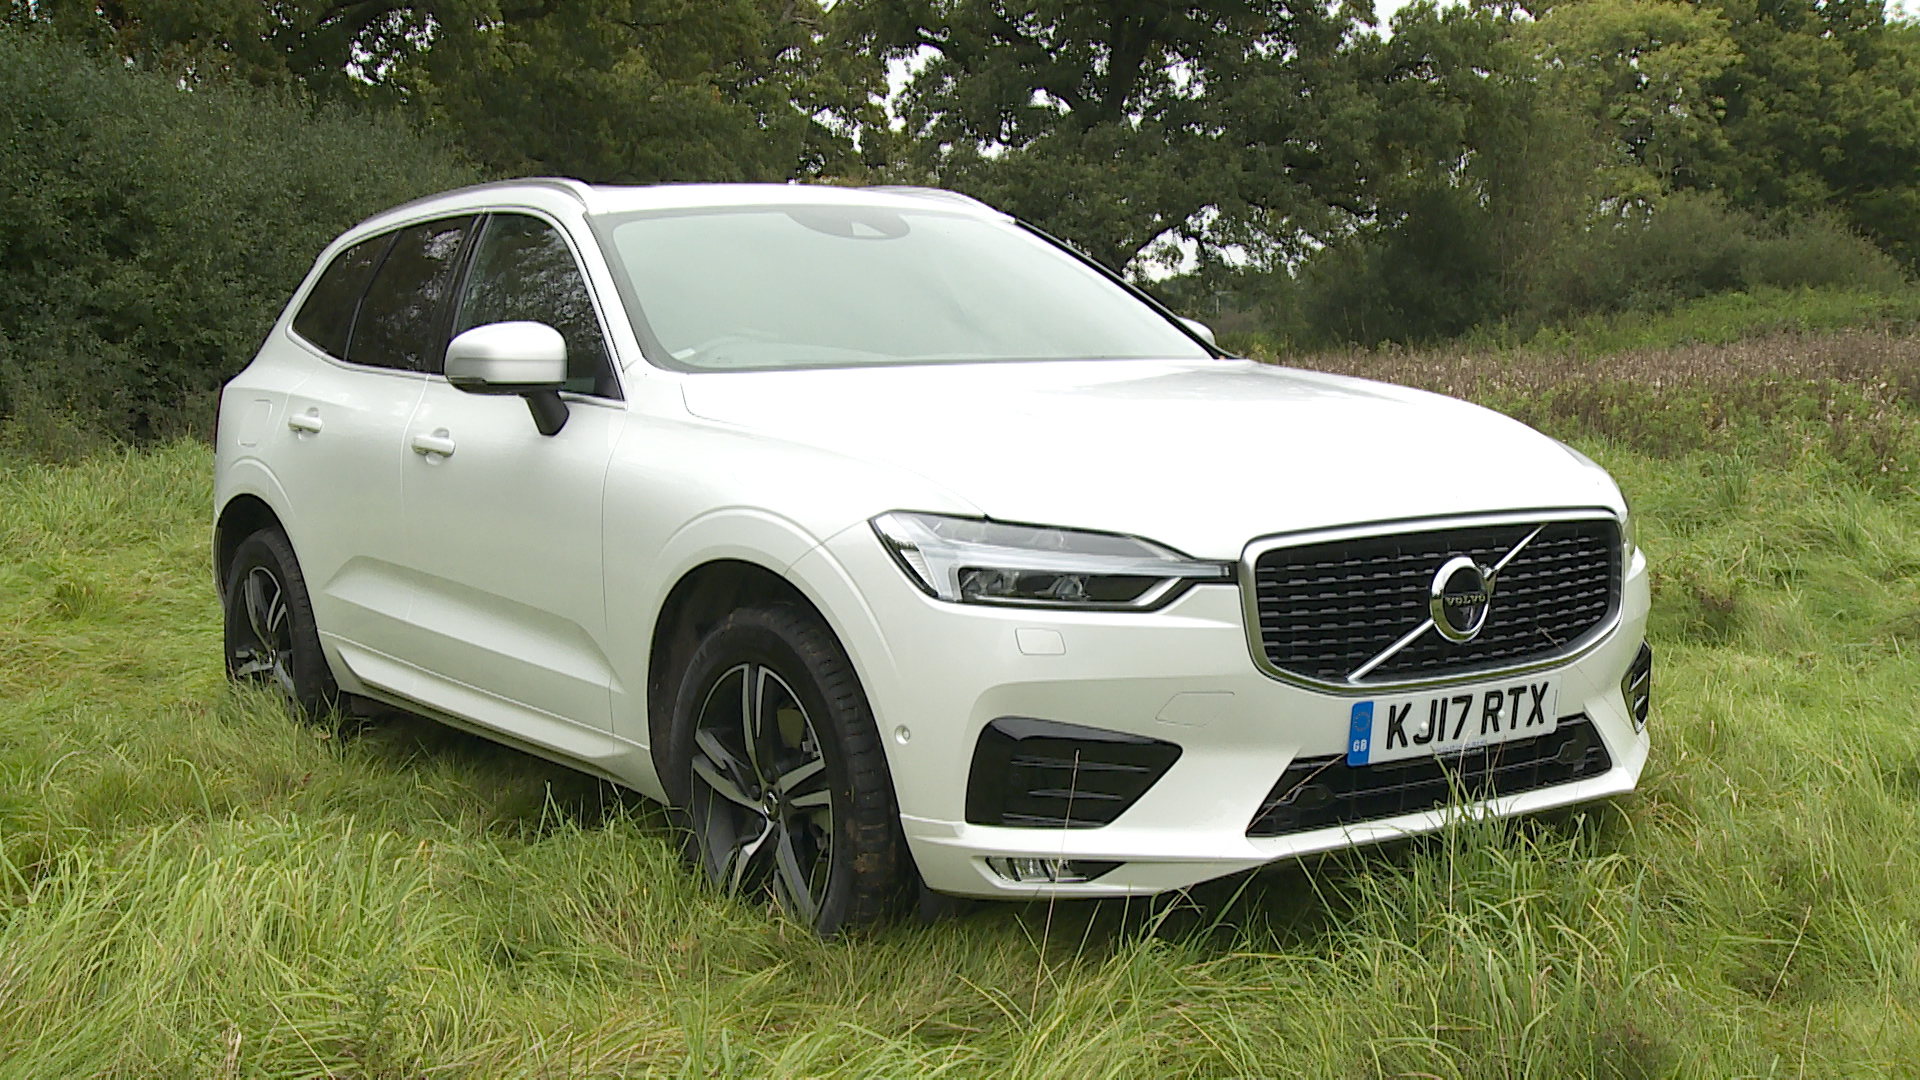 VOLVO XC60 ESTATE 2.0 B5P Core 5dr AWD Geartronic